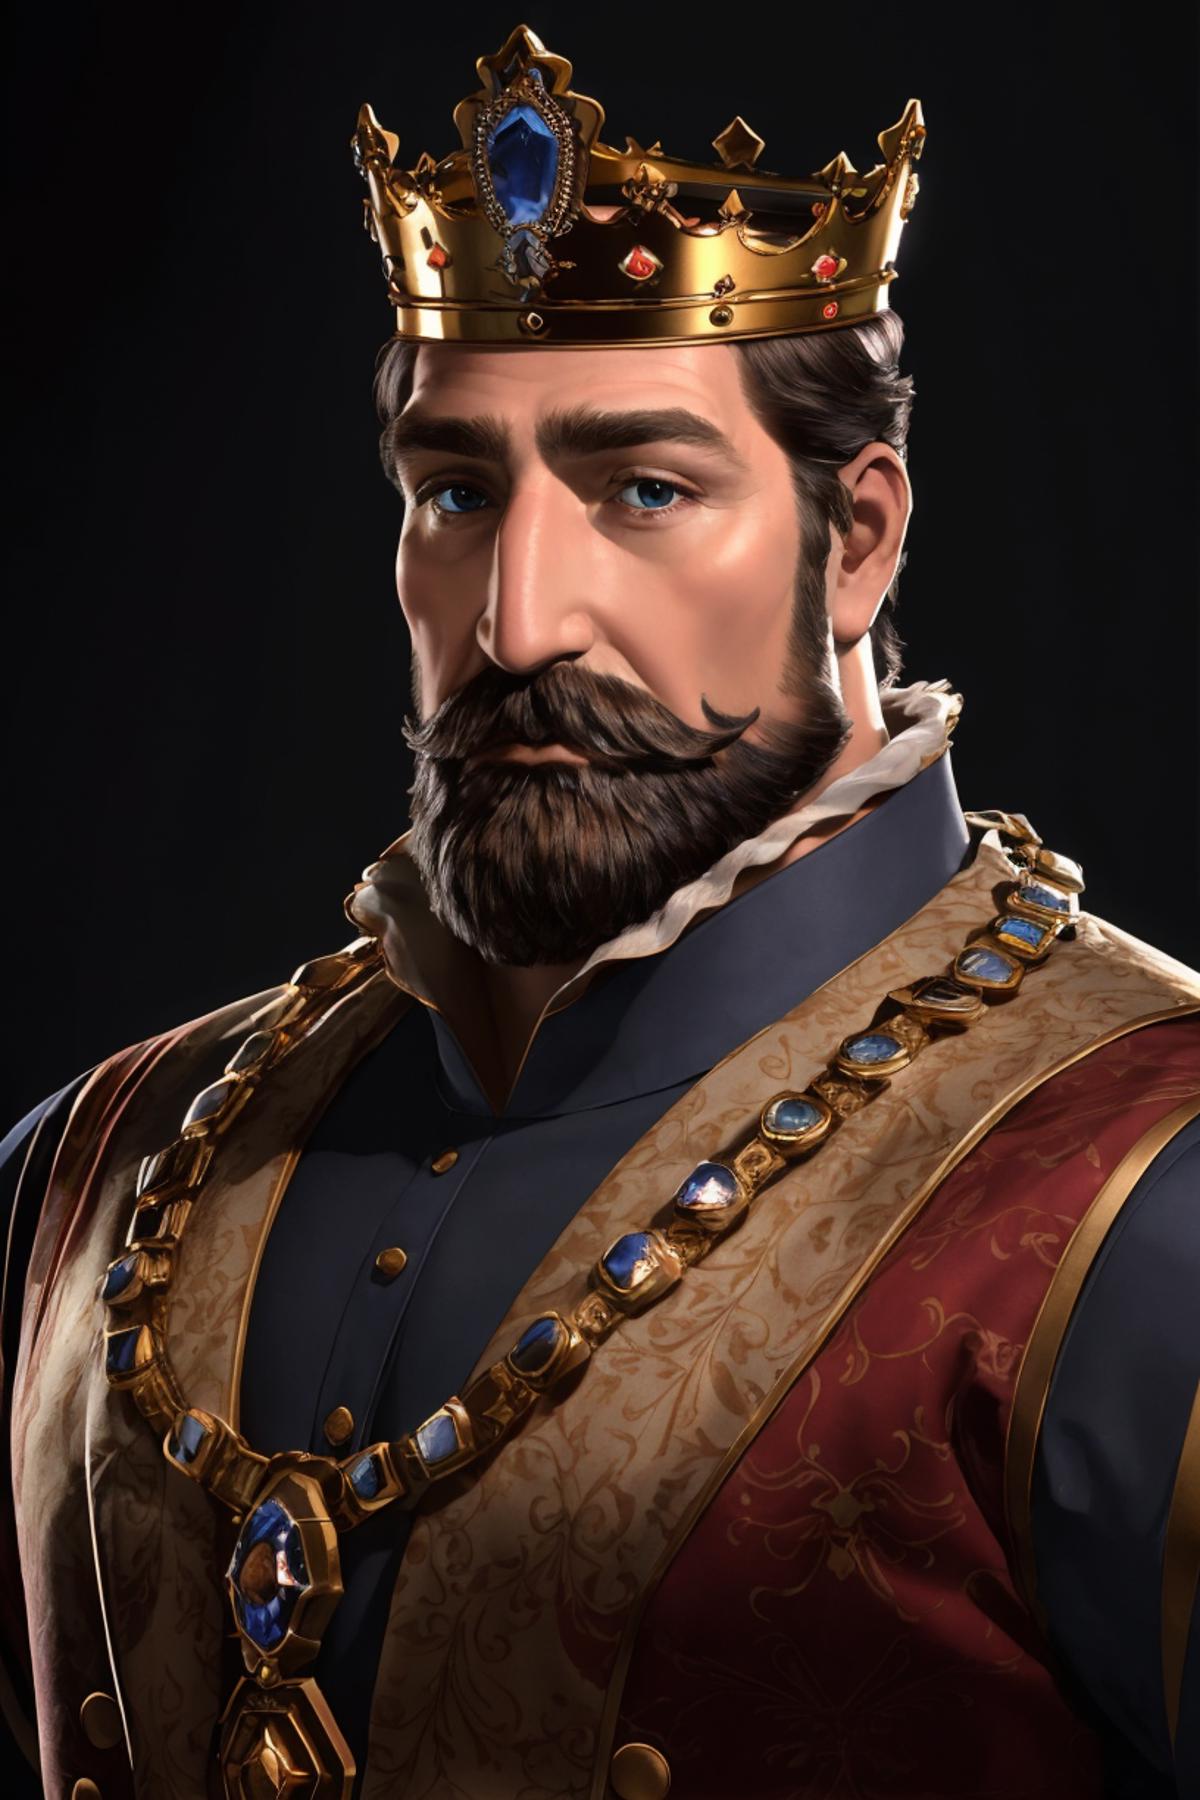 King Frederic [Disney's Tangled] image by BaraObserver